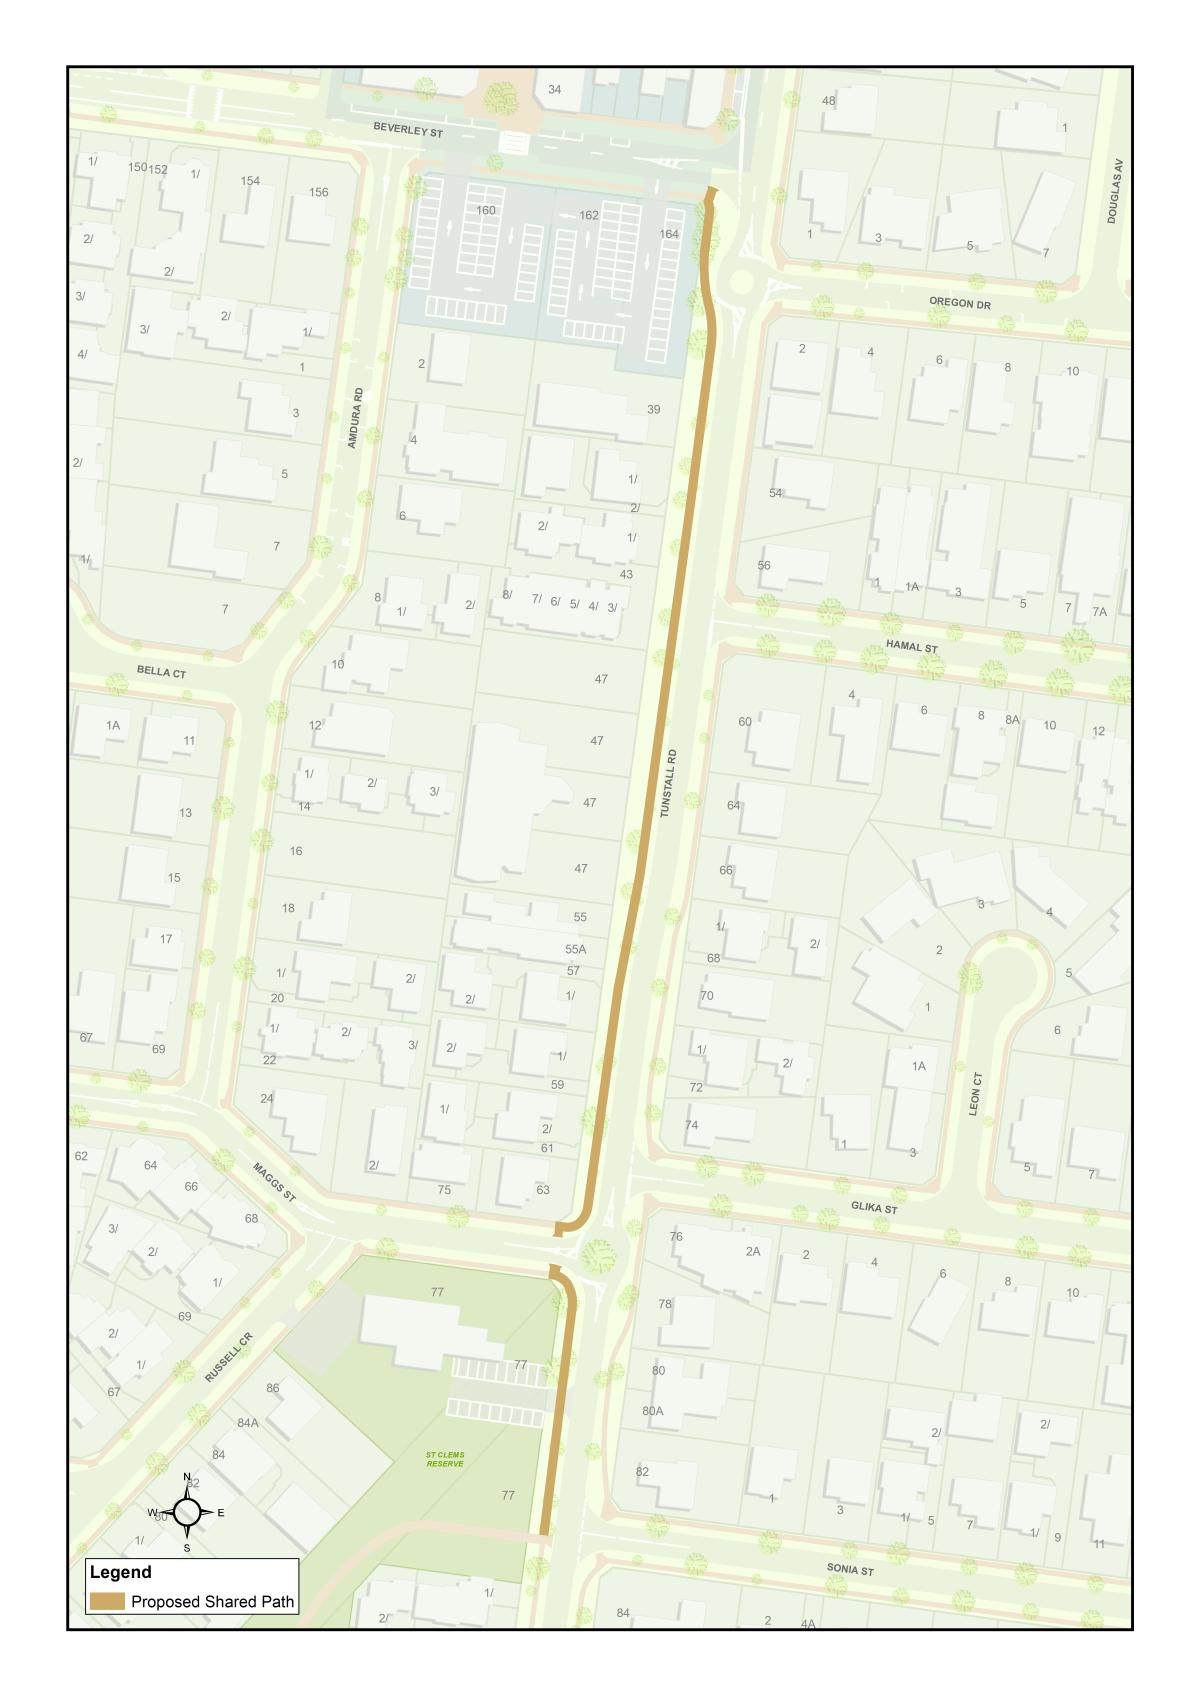 A map with line markings showing the location of the proposed footpath along Tunstall Road, Donvale.